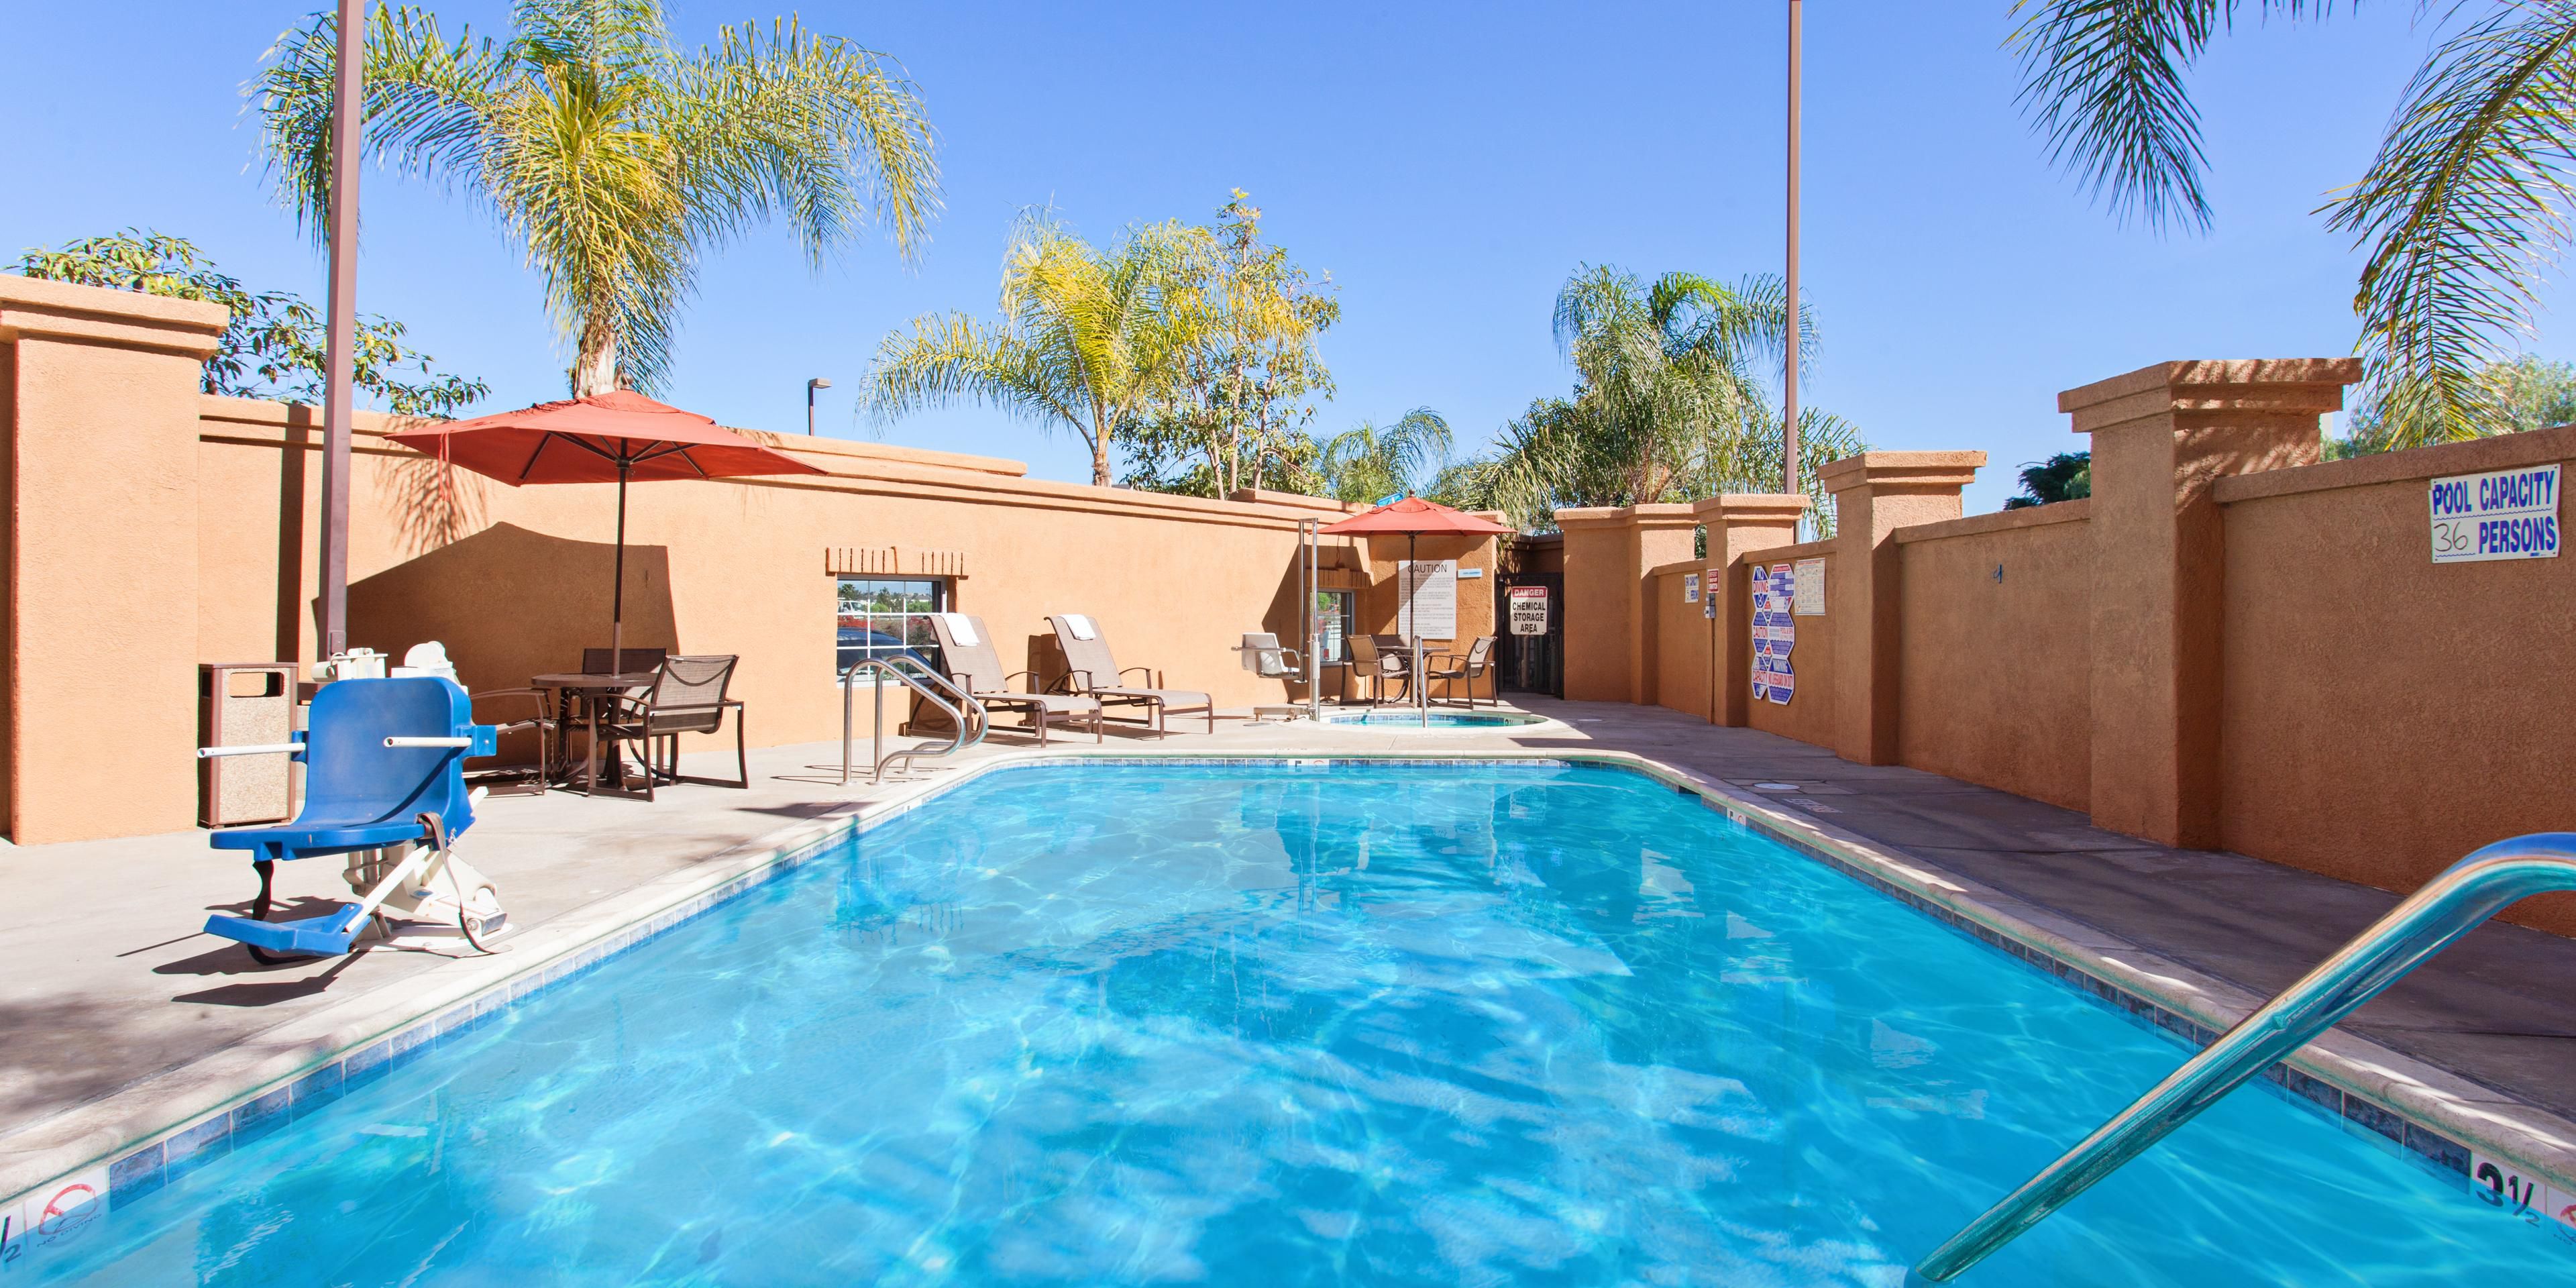 We are the best selection for hotels with a pool in Corona, CA and near Riverside! Our outdoor swimming pool is open, and we would love to welcome you for a refreshing swim. 